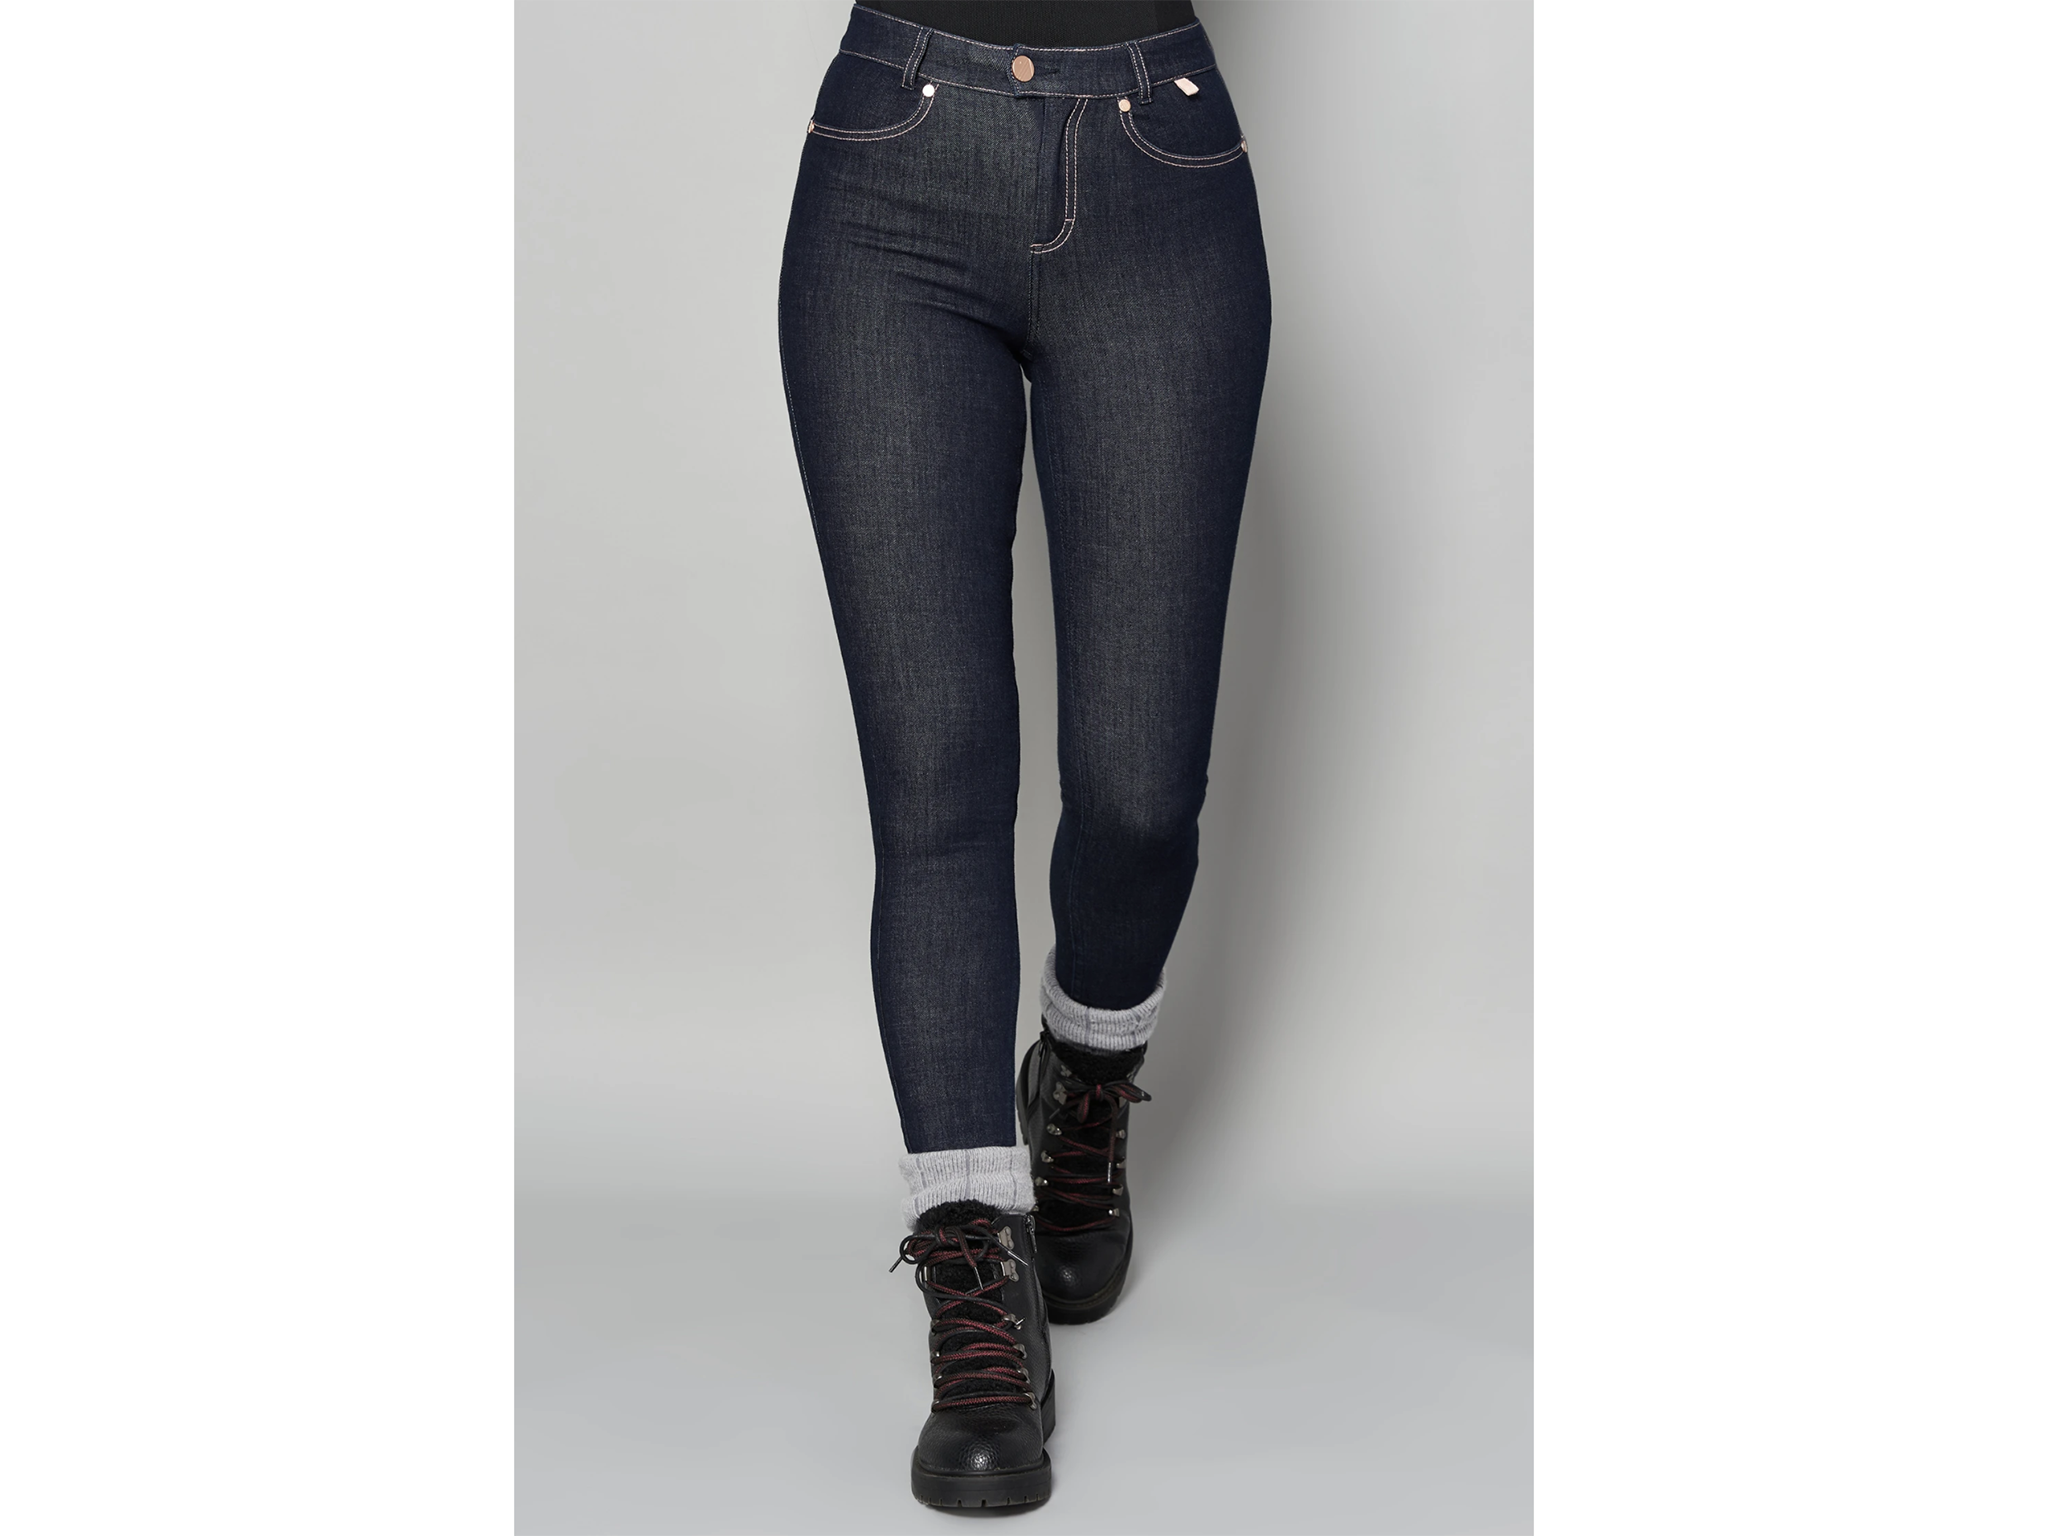 Fleece-lined jeans: High-waisted trousers that keep you warm